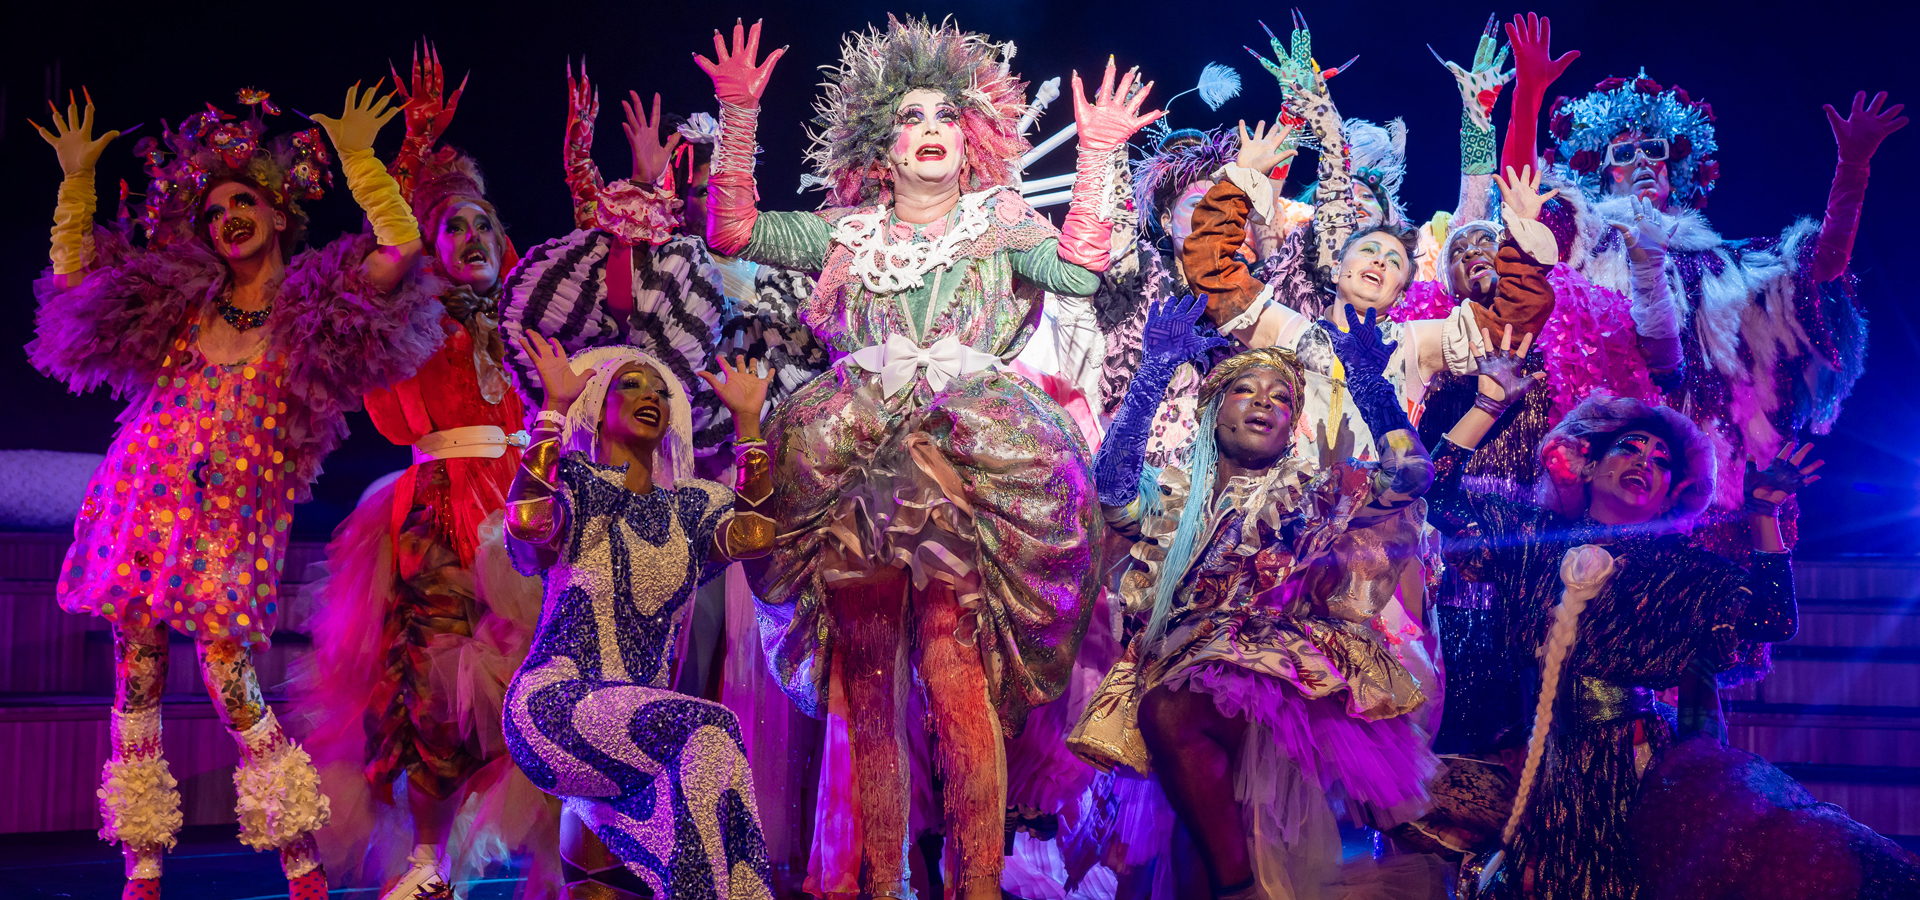 The bark of millions performers wear elaborately textured neon costumes and wigs, posing in a group on stage with their hands raised.